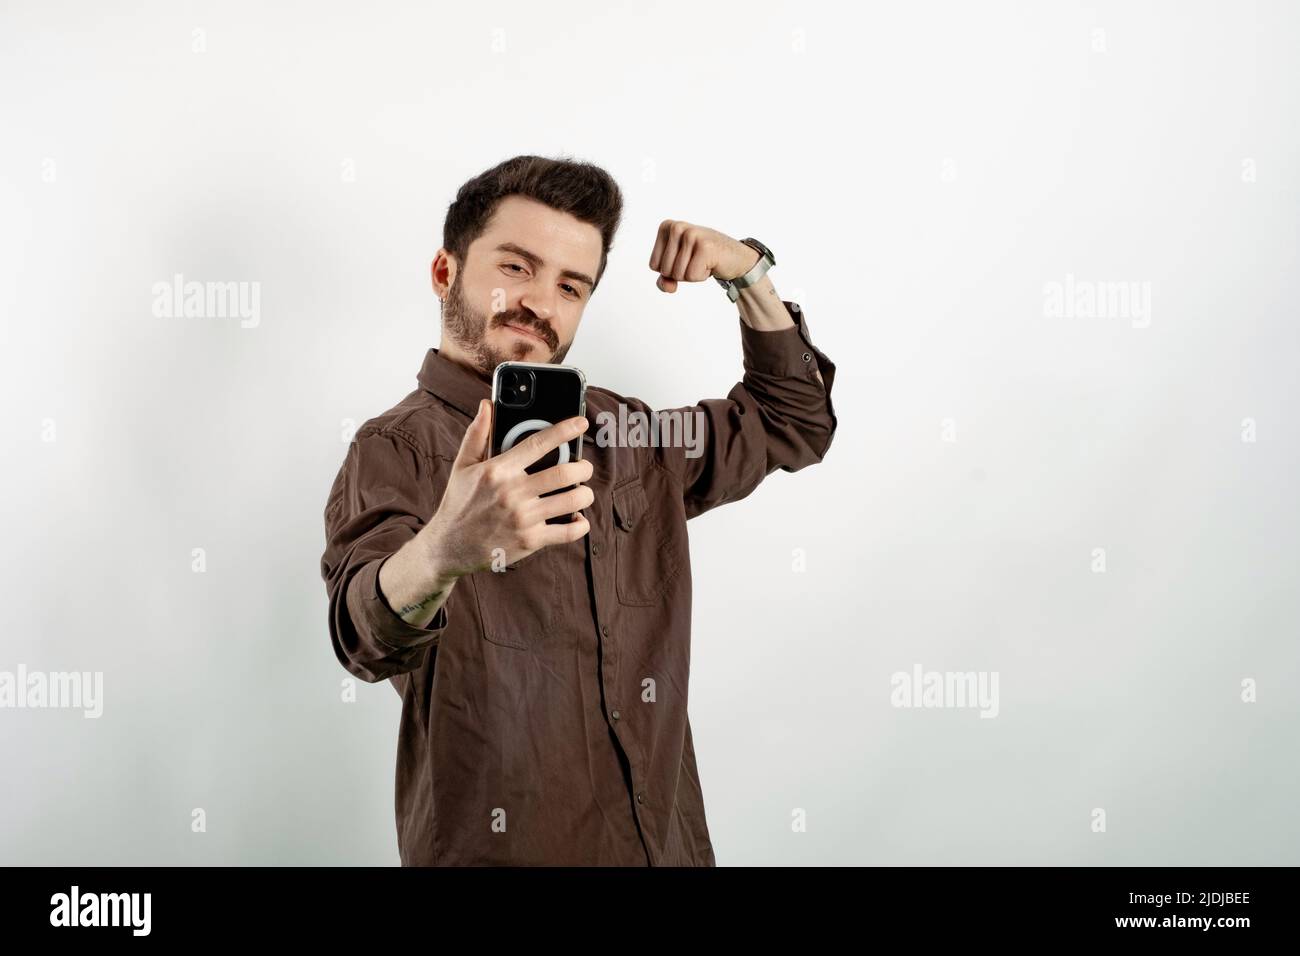 Caucasian man wearing brown shirt posing isolated over white background taking selfie, showing strong arm, flexing biceps and posing for photo. Stock Photo